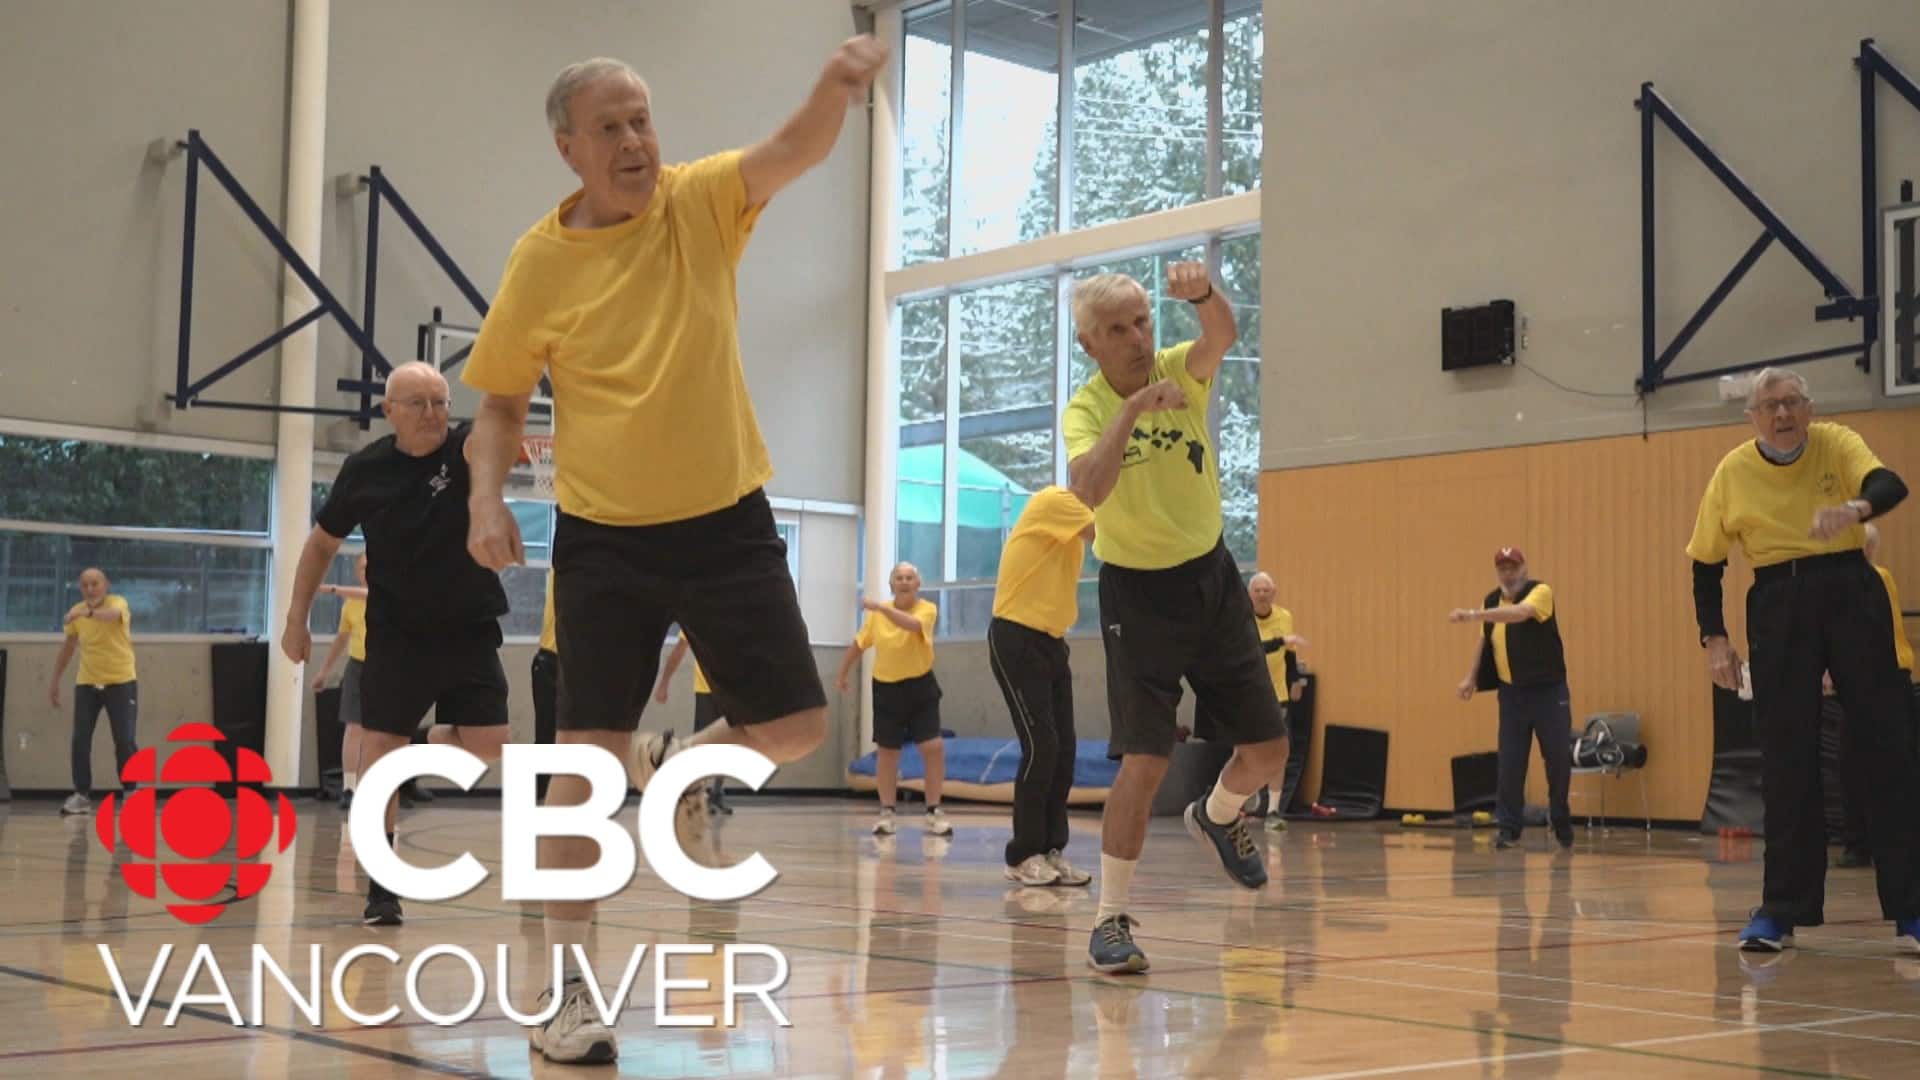 West Vancouver exercise program tackles more than just fitness [Video]